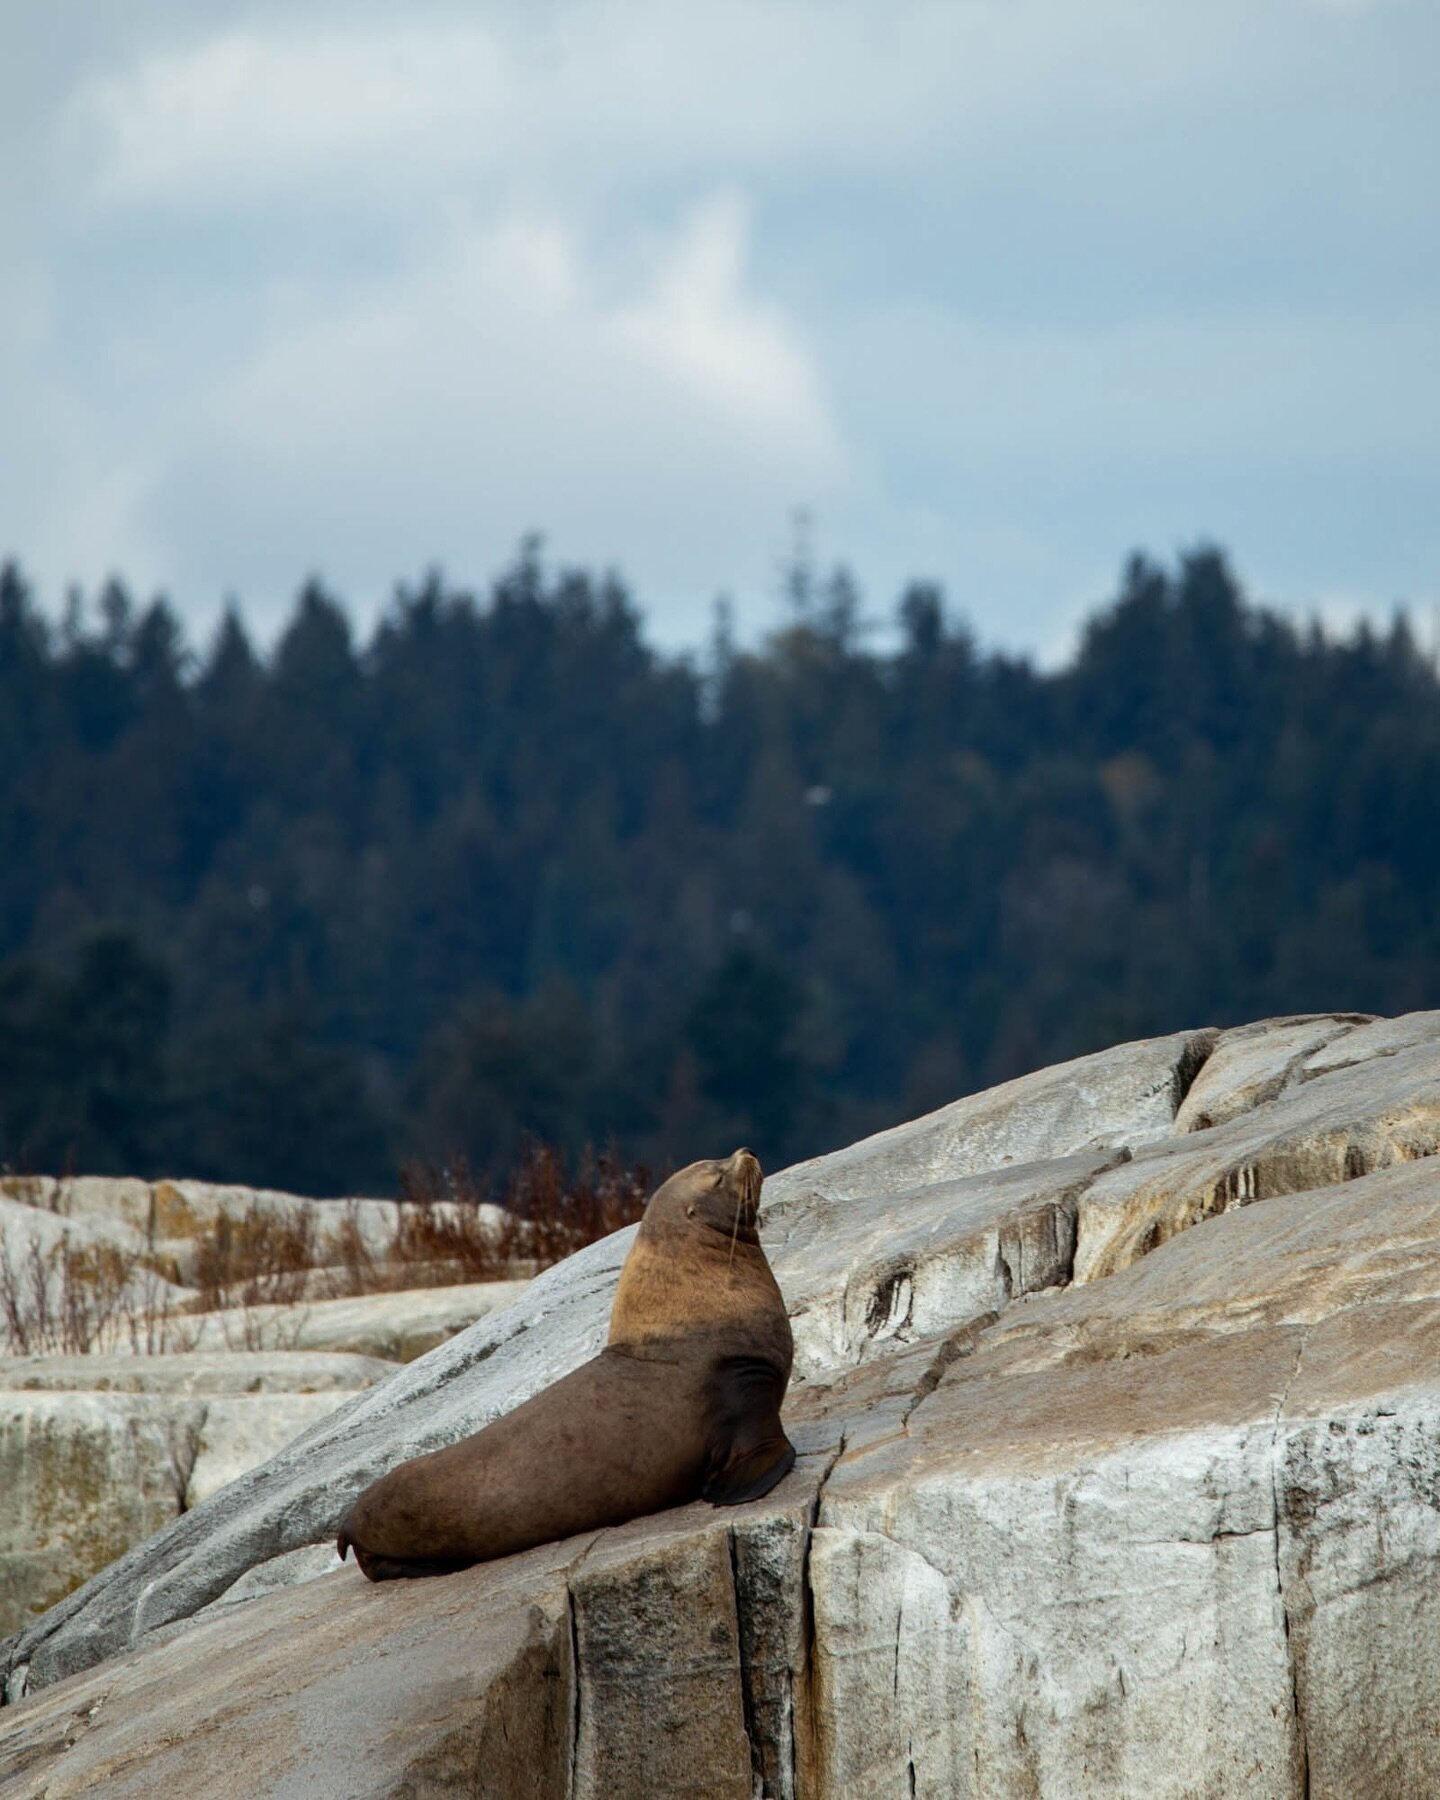 A steller sea lion resting on a small islet near the shores of the Sunshine Coast. 🦭